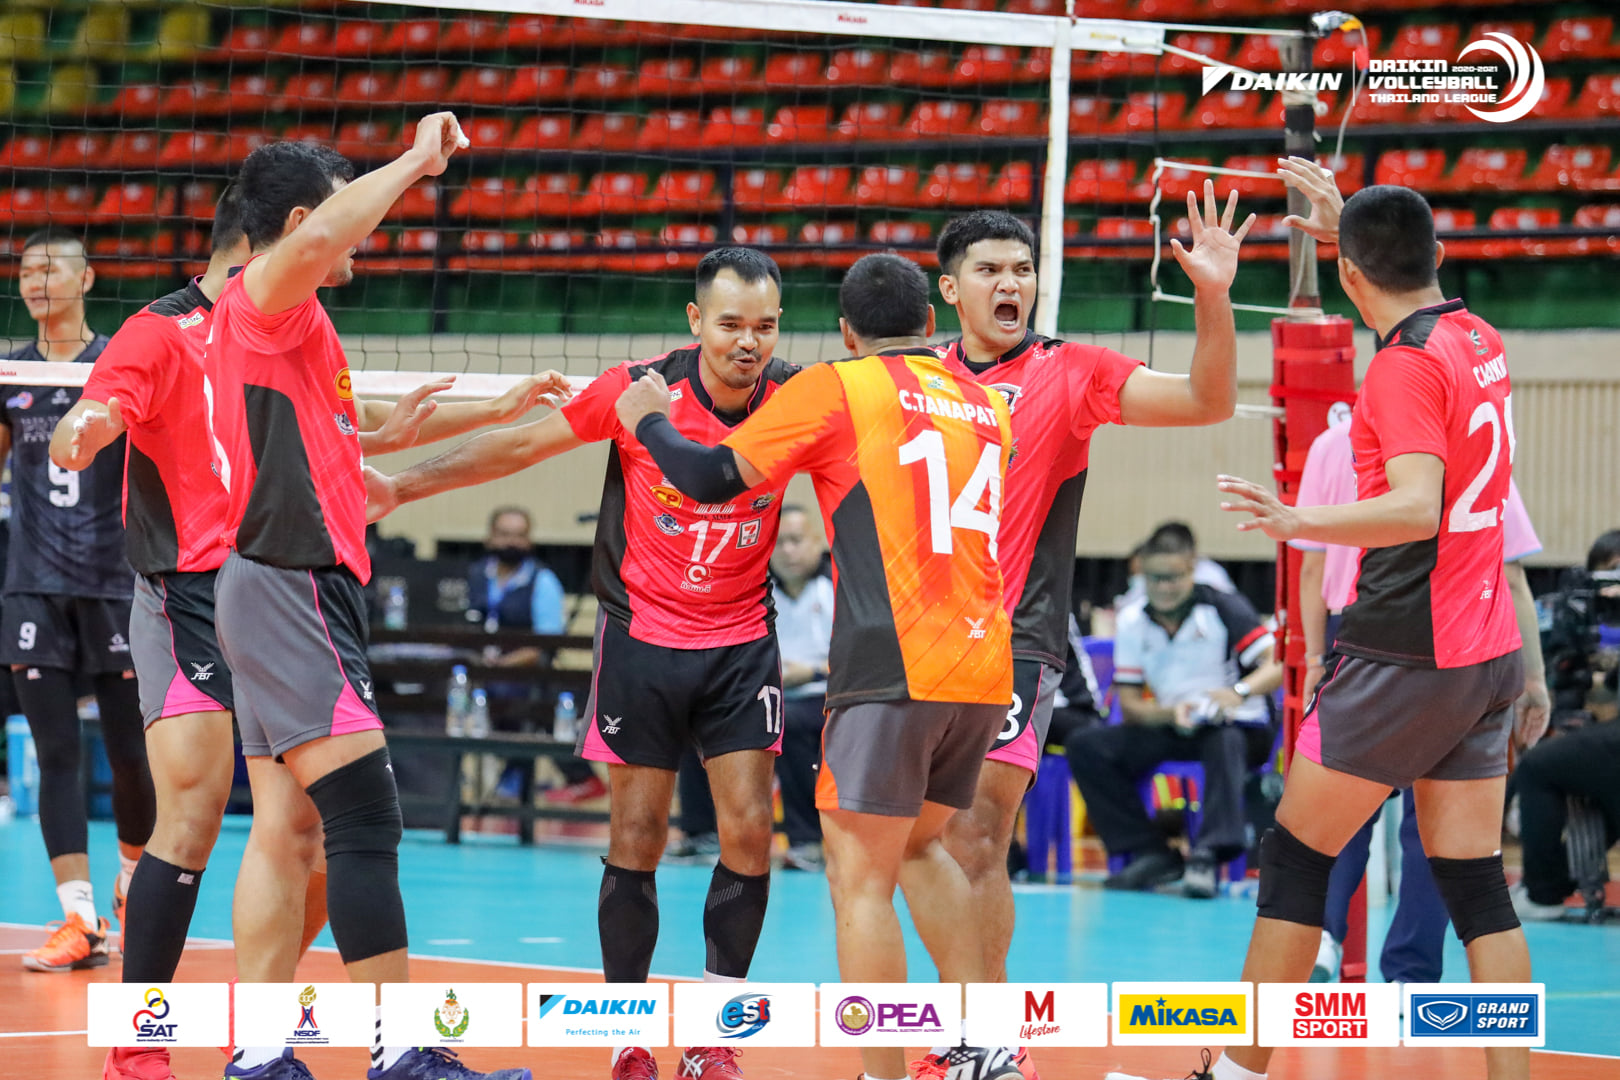 REIGNING CHAMPS NAKHON RATCHASIMA AND SUPREME CLAIM 2 IN SUCCESSION IN THAILAND VOLLEYBALL LEAGUE